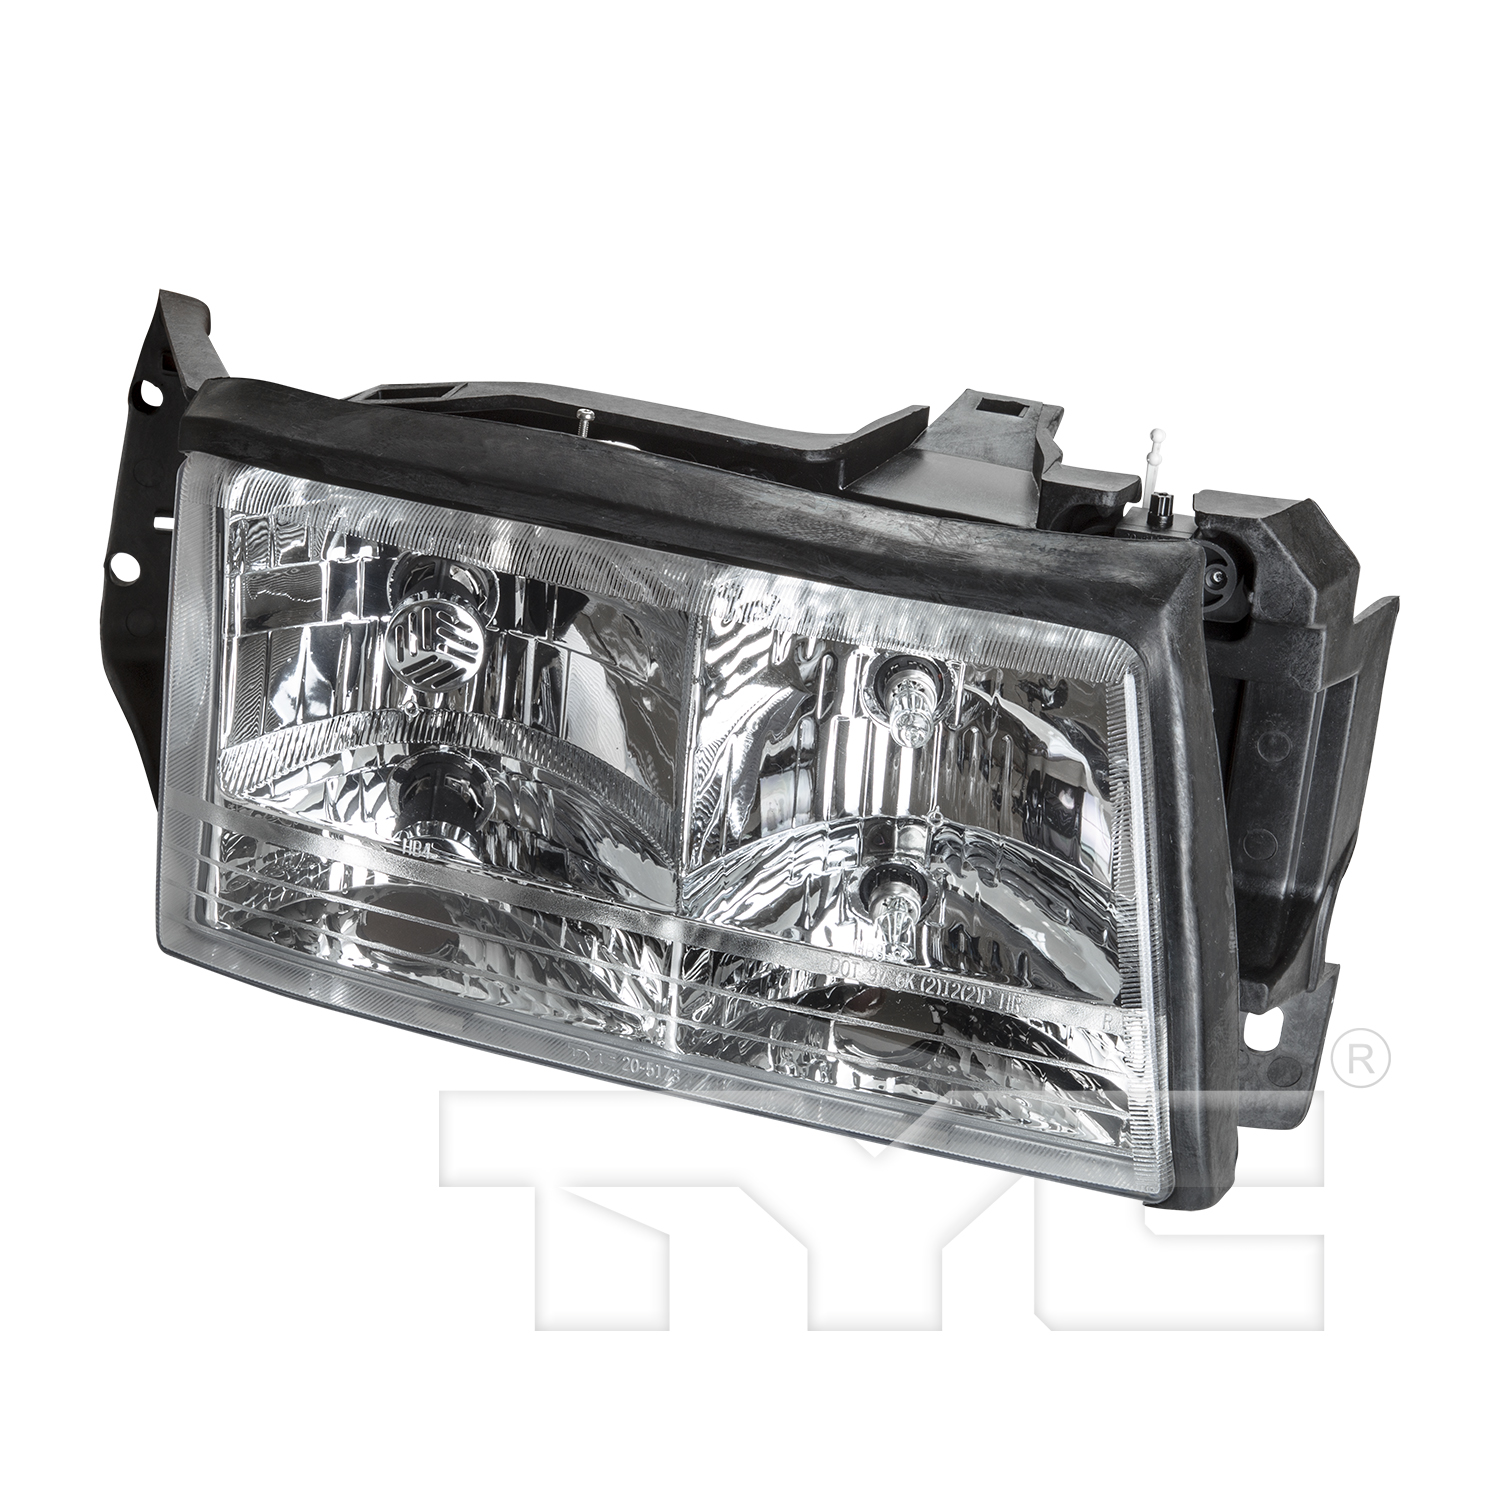 Aftermarket HEADLIGHTS for CADILLAC - DEVILLE, DEVILLE,97-99,RT Headlamp assy composite